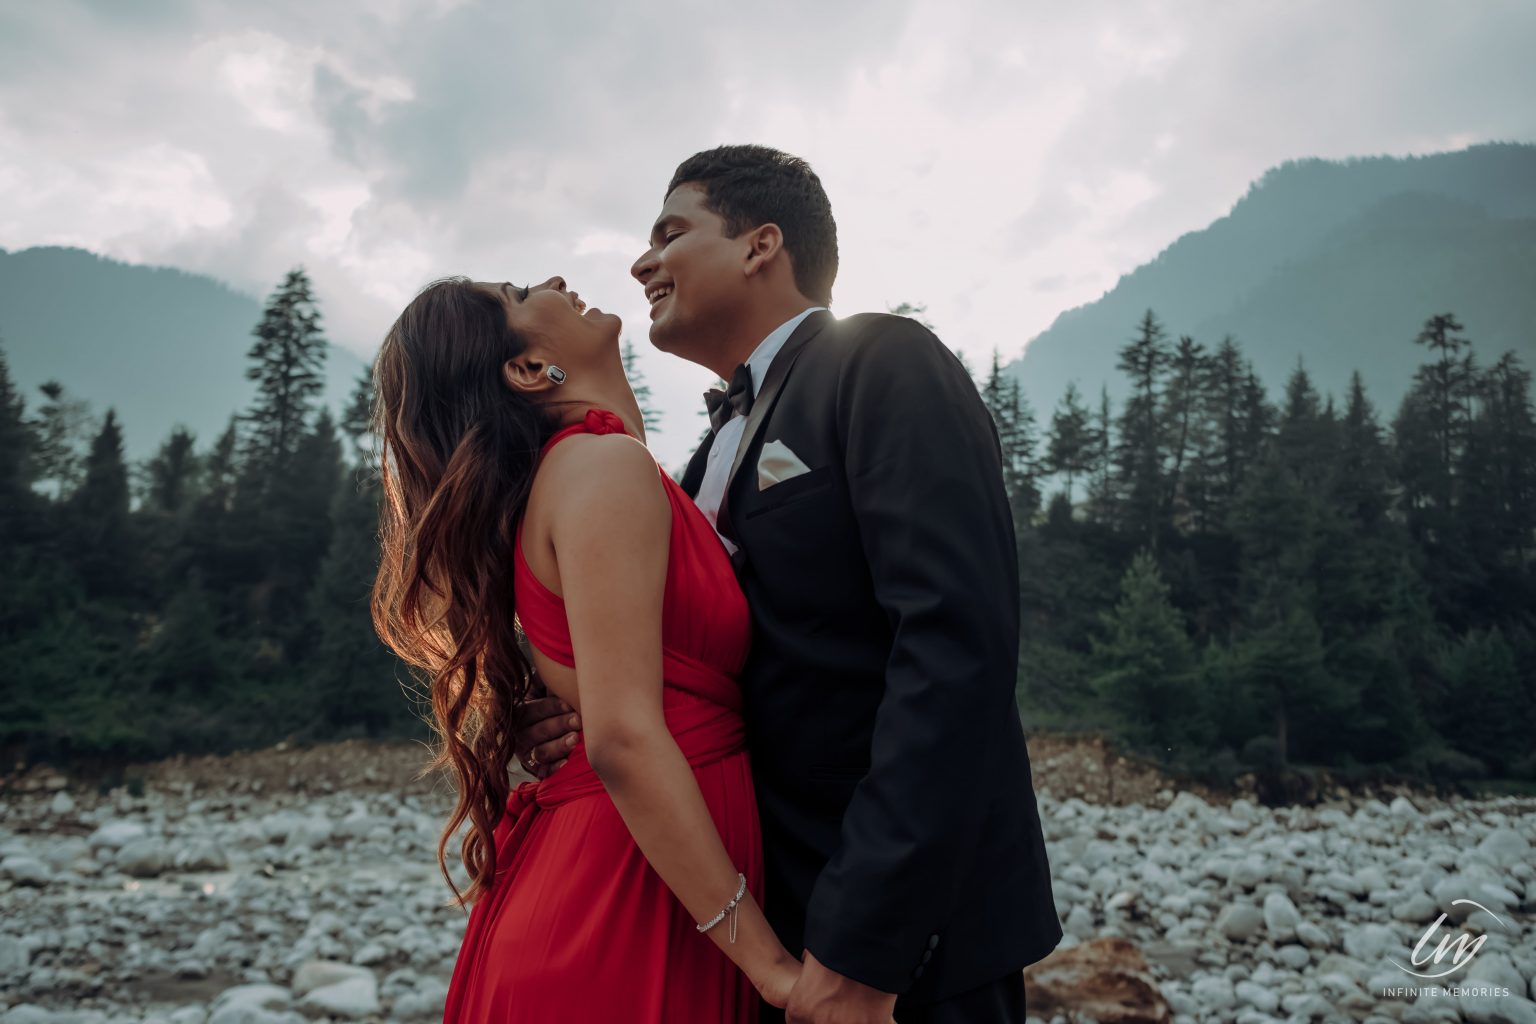 Find 50 Unique Pre Wedding Shoot Ideas For Every Couple 0401